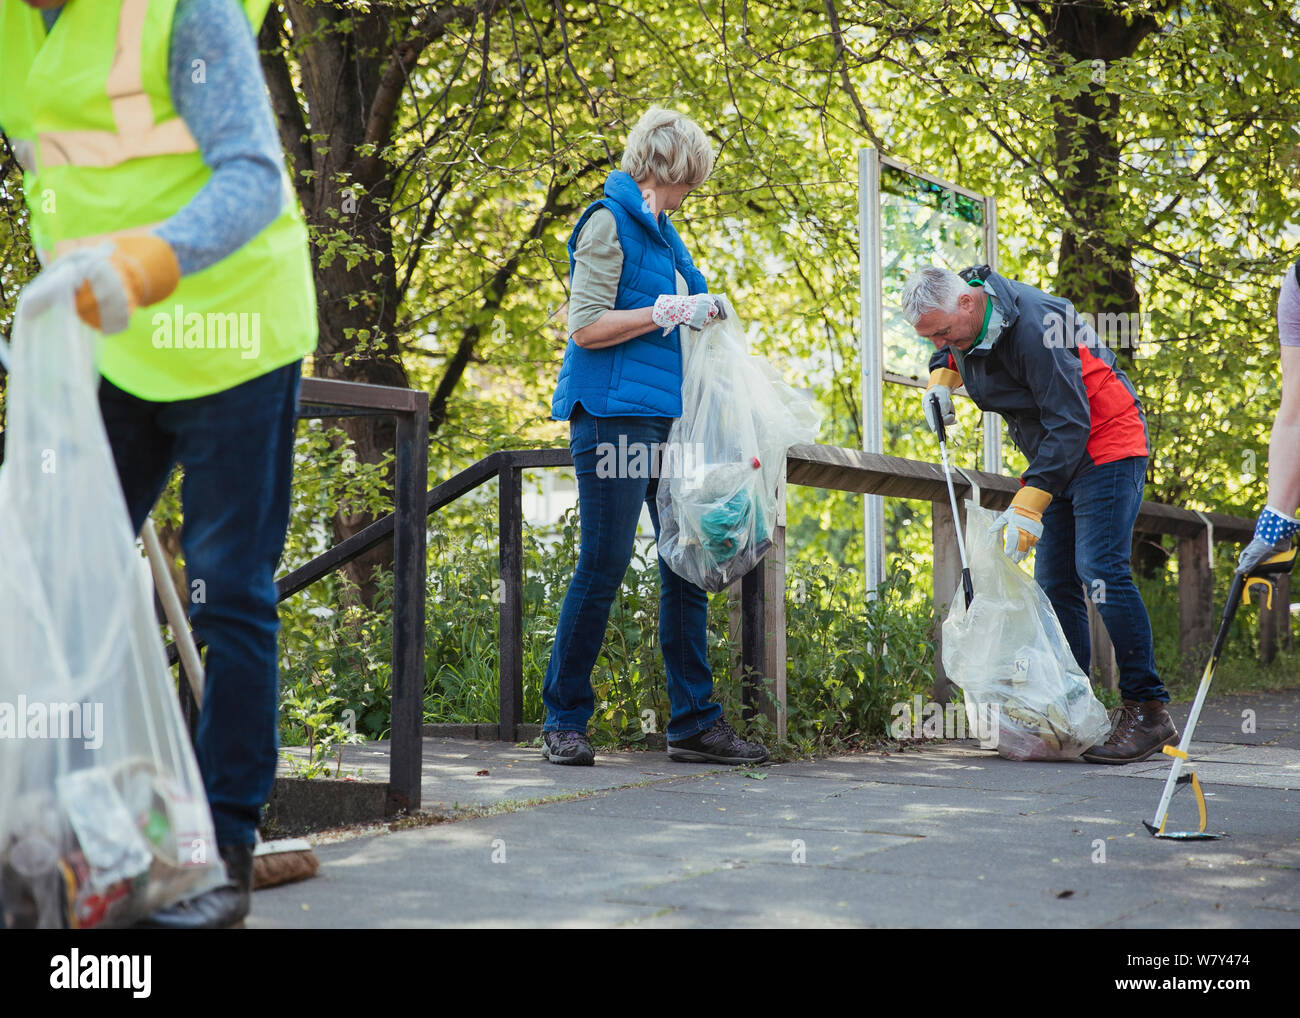 A group of people participating in a city clean-up together. Stock Photo